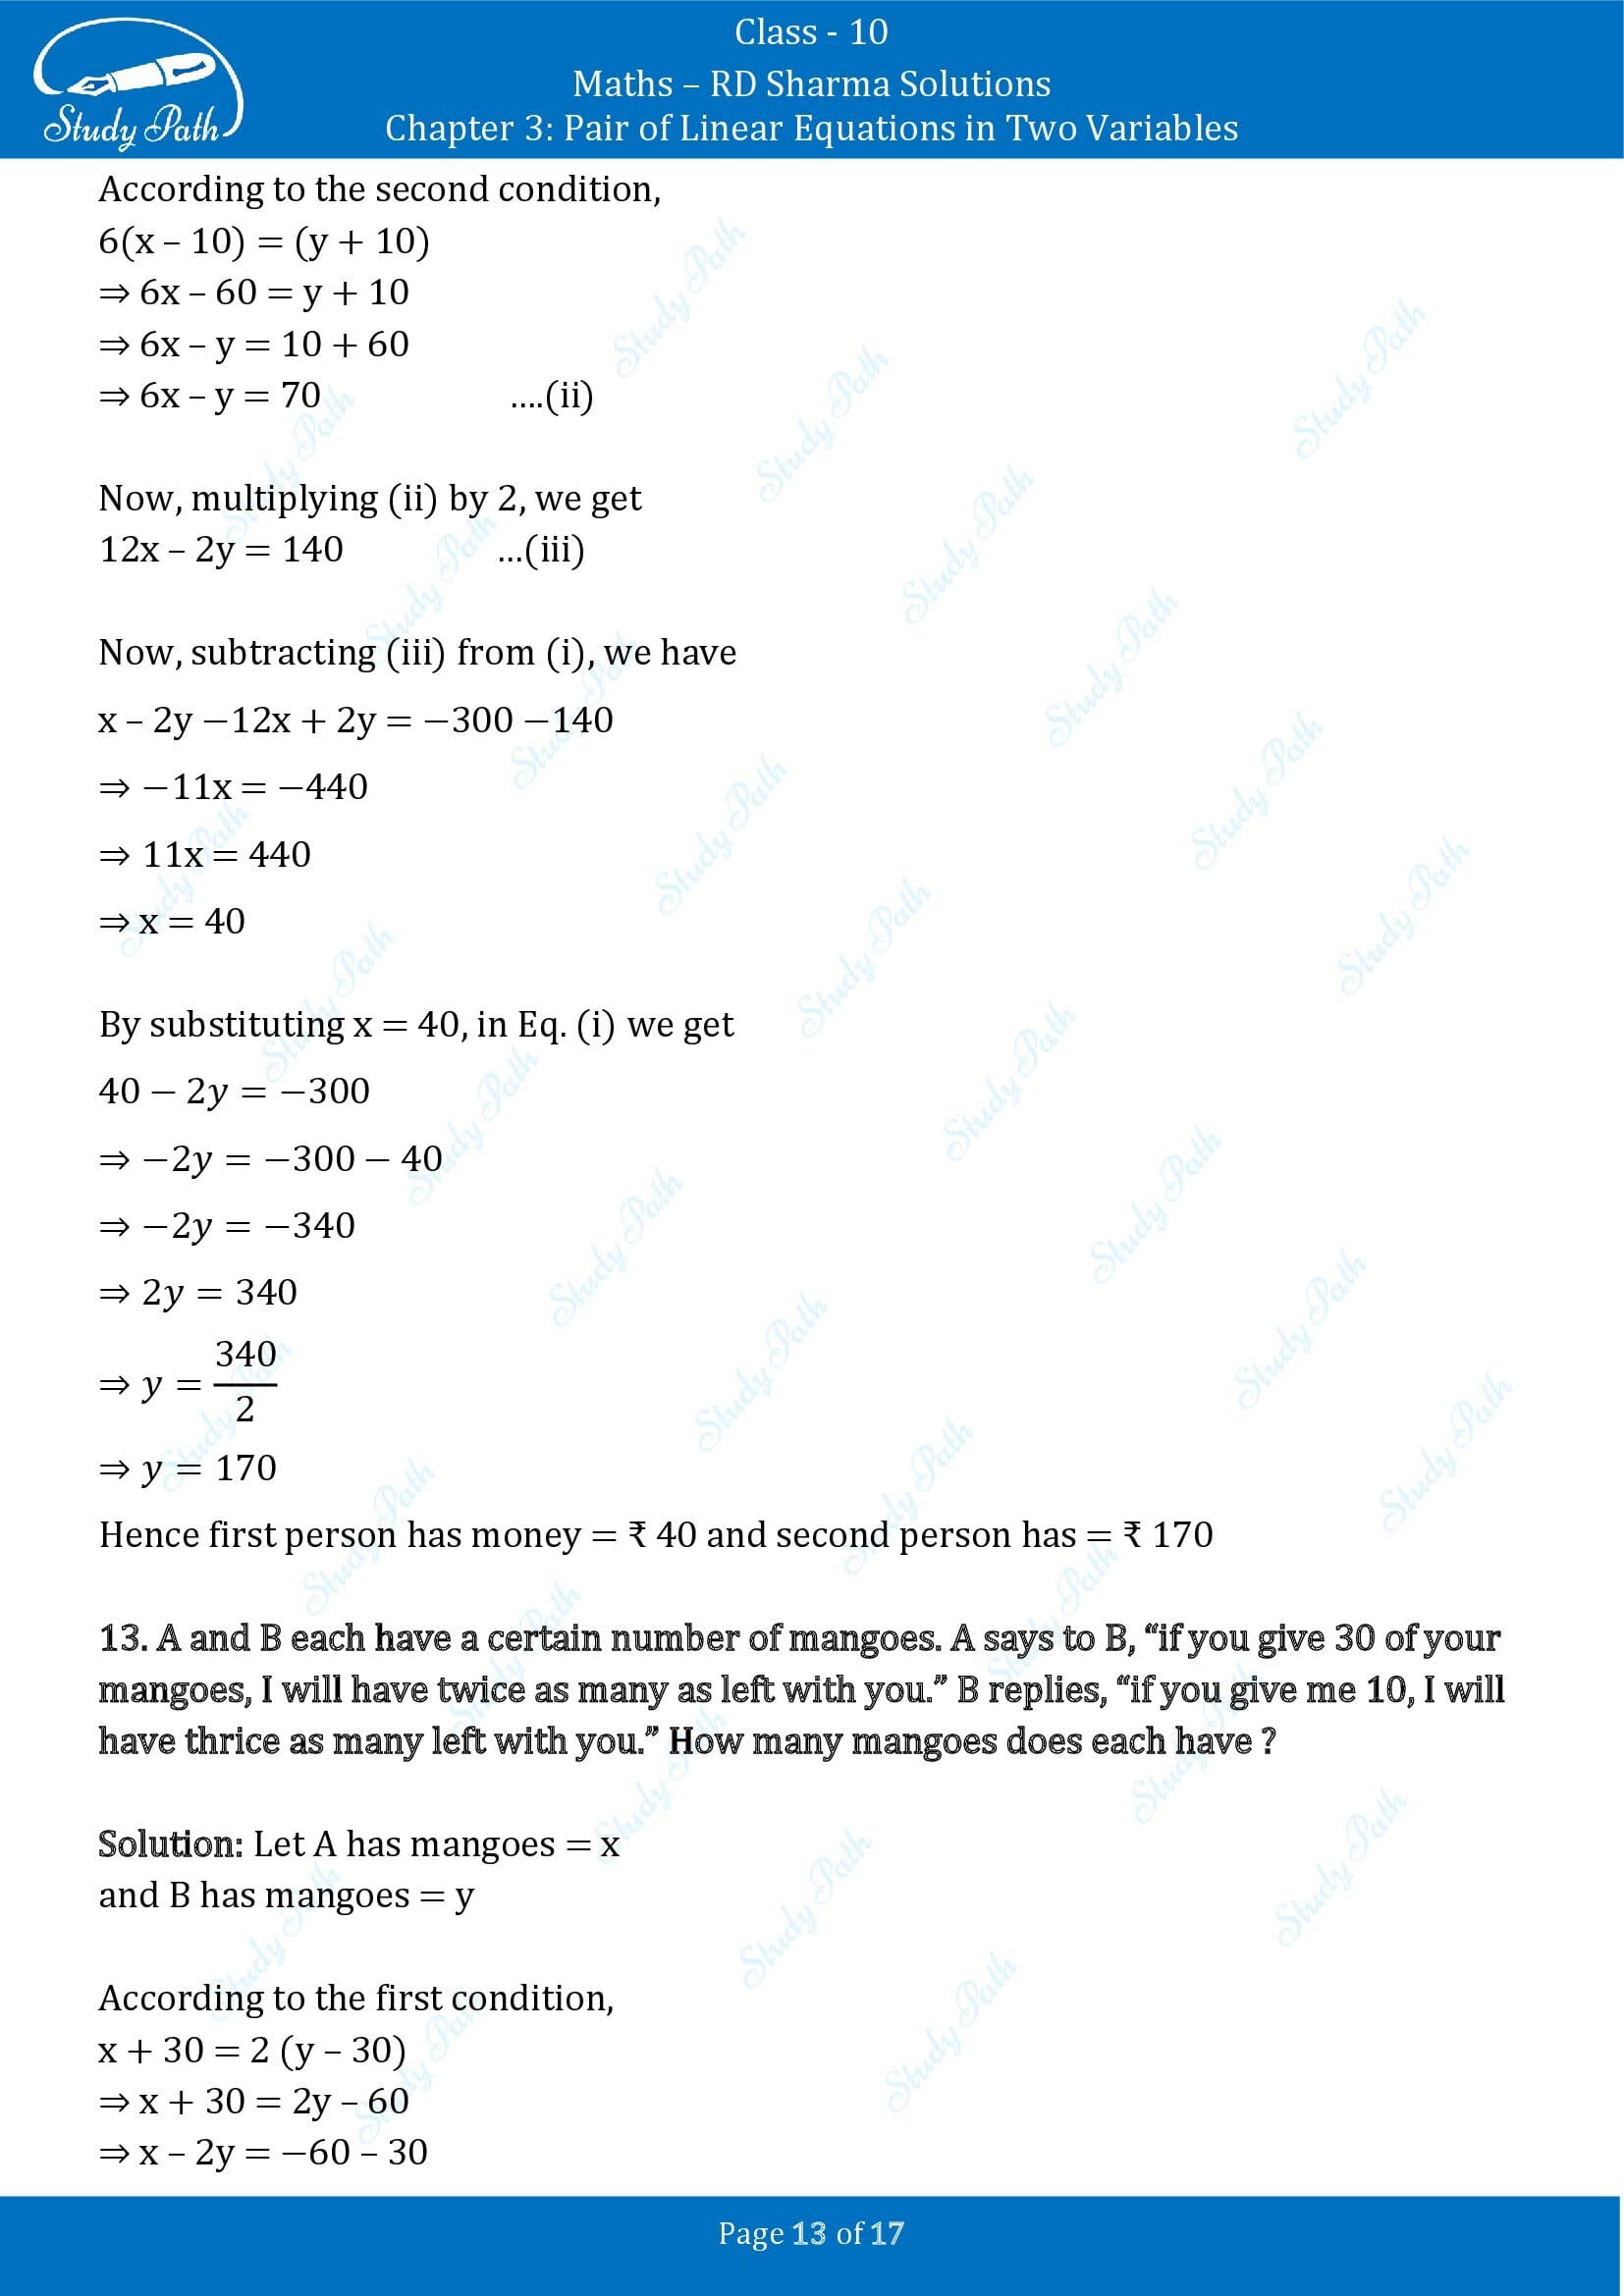 RD Sharma Solutions Class 10 Chapter 3 Pair of Linear Equations in Two Variables Exercise 3.6 00013